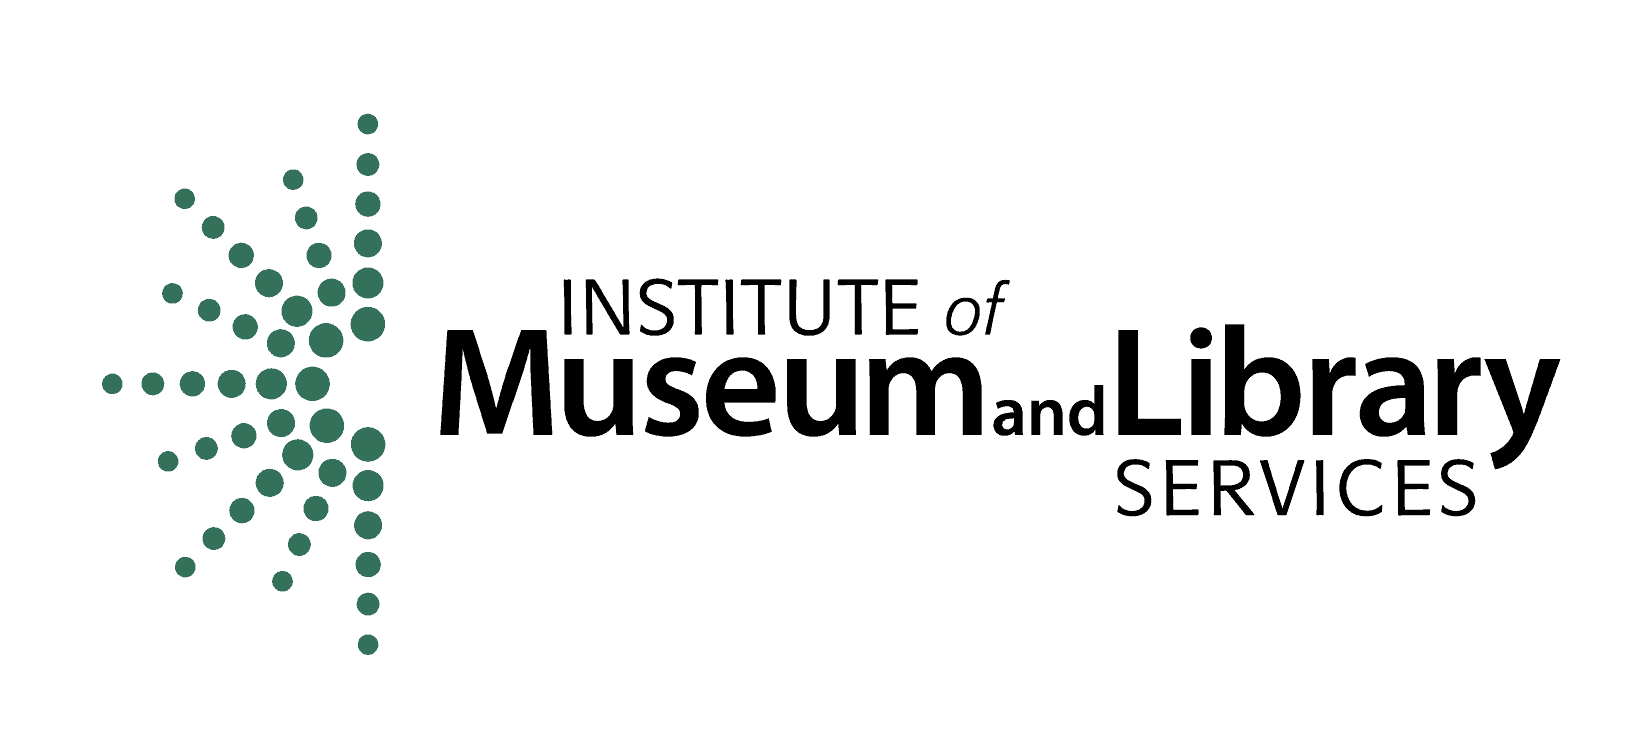 Institute of Museum and Library Services Logo